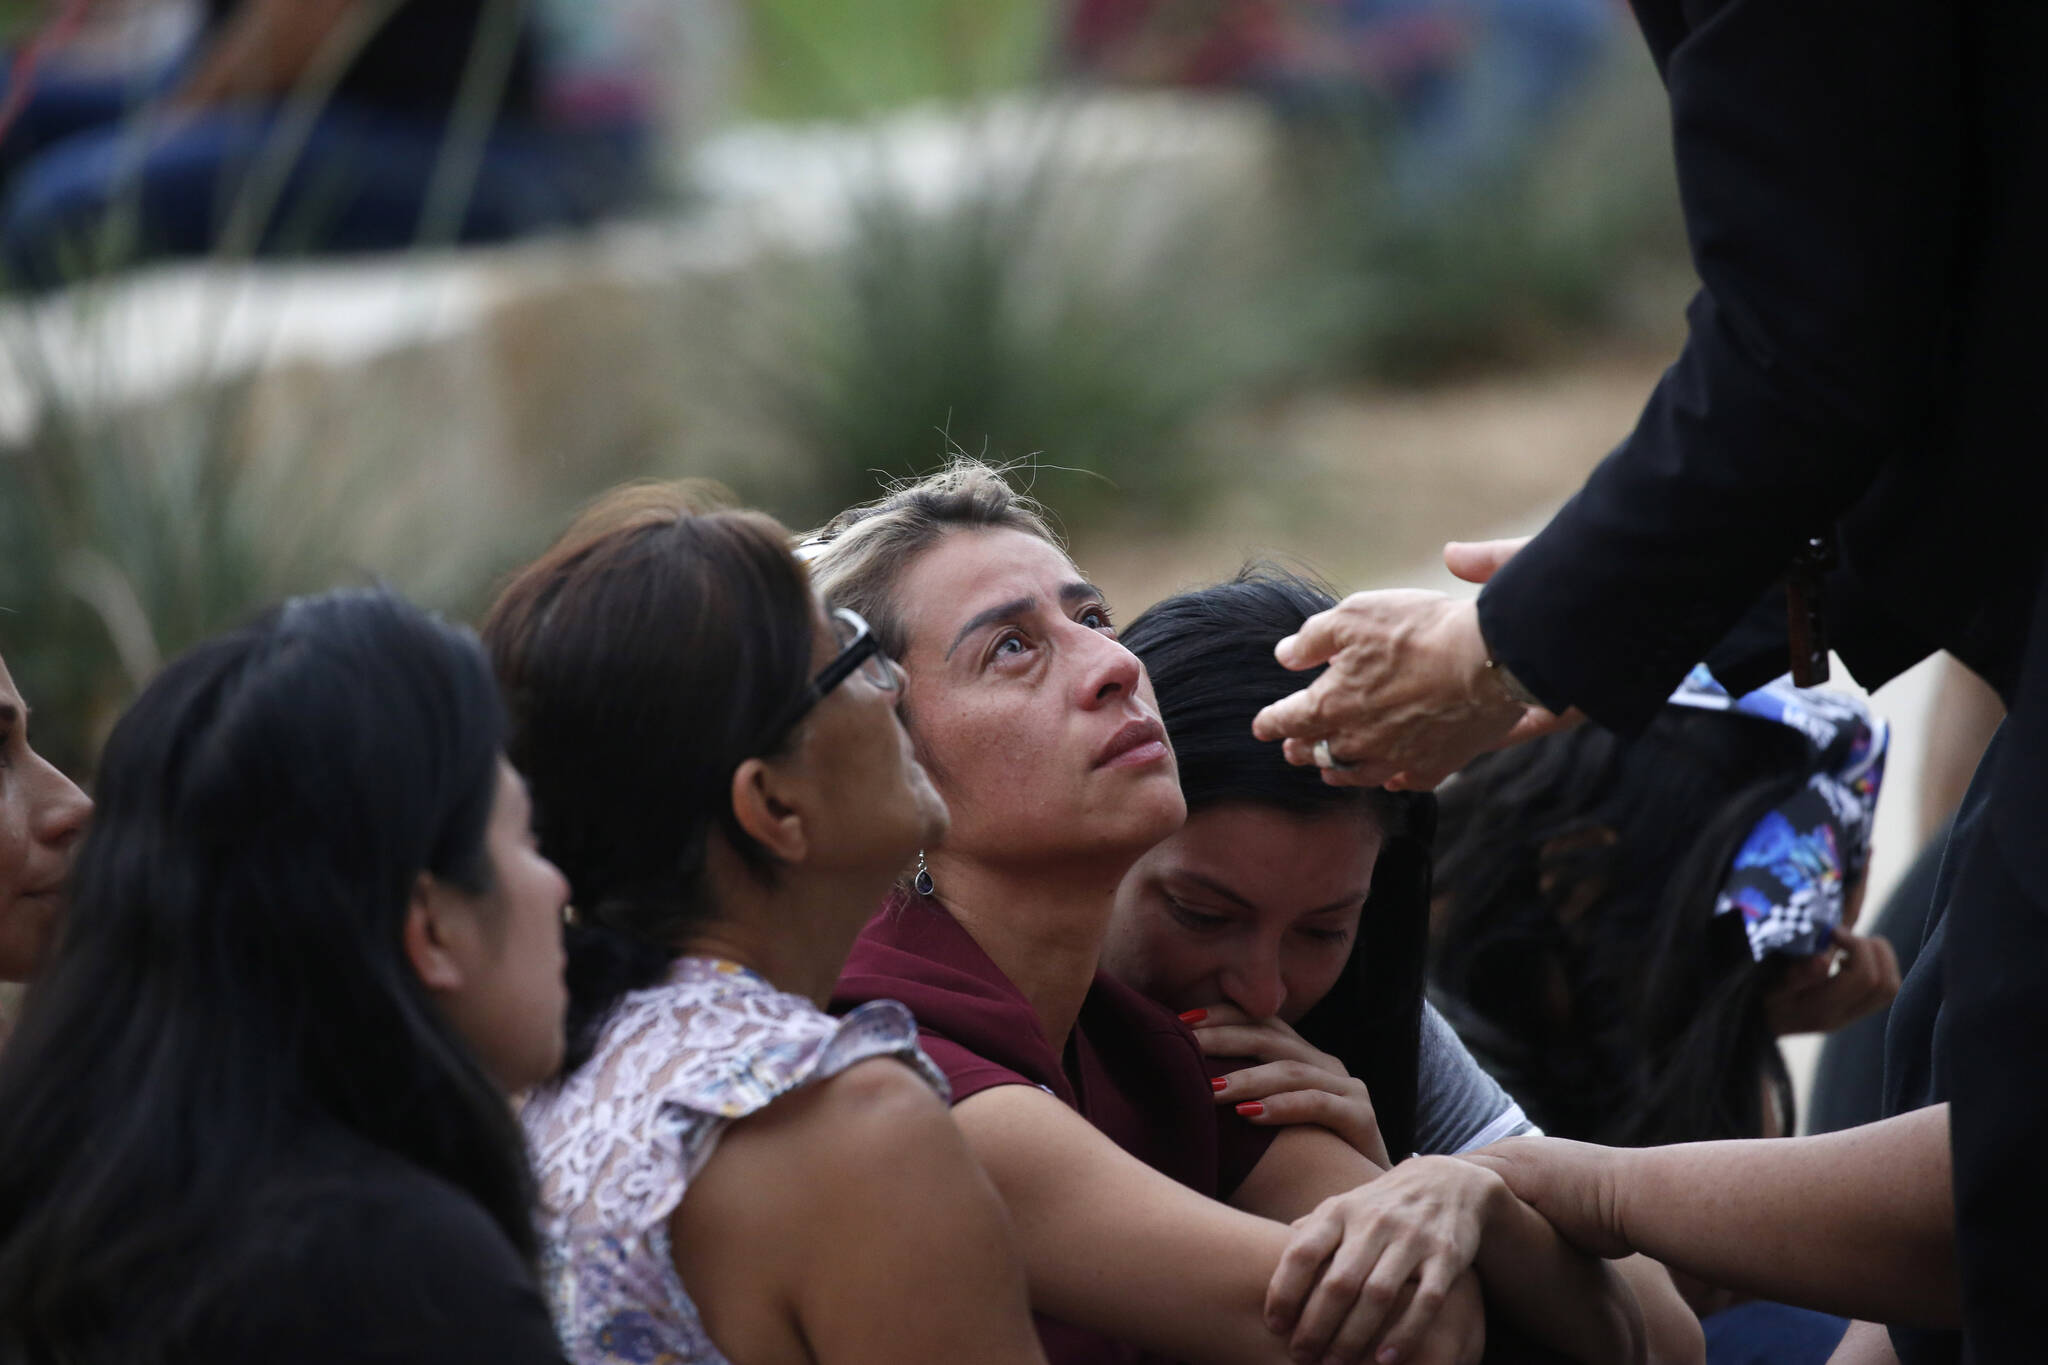 The archbishop of San Antonio, Gustavo Garcia-Siller, comforts families outside of the Civic Center in Uvalde, Texas Tuesday, May 24, 2022. (AP Photo/Dario Lopez-Mills)